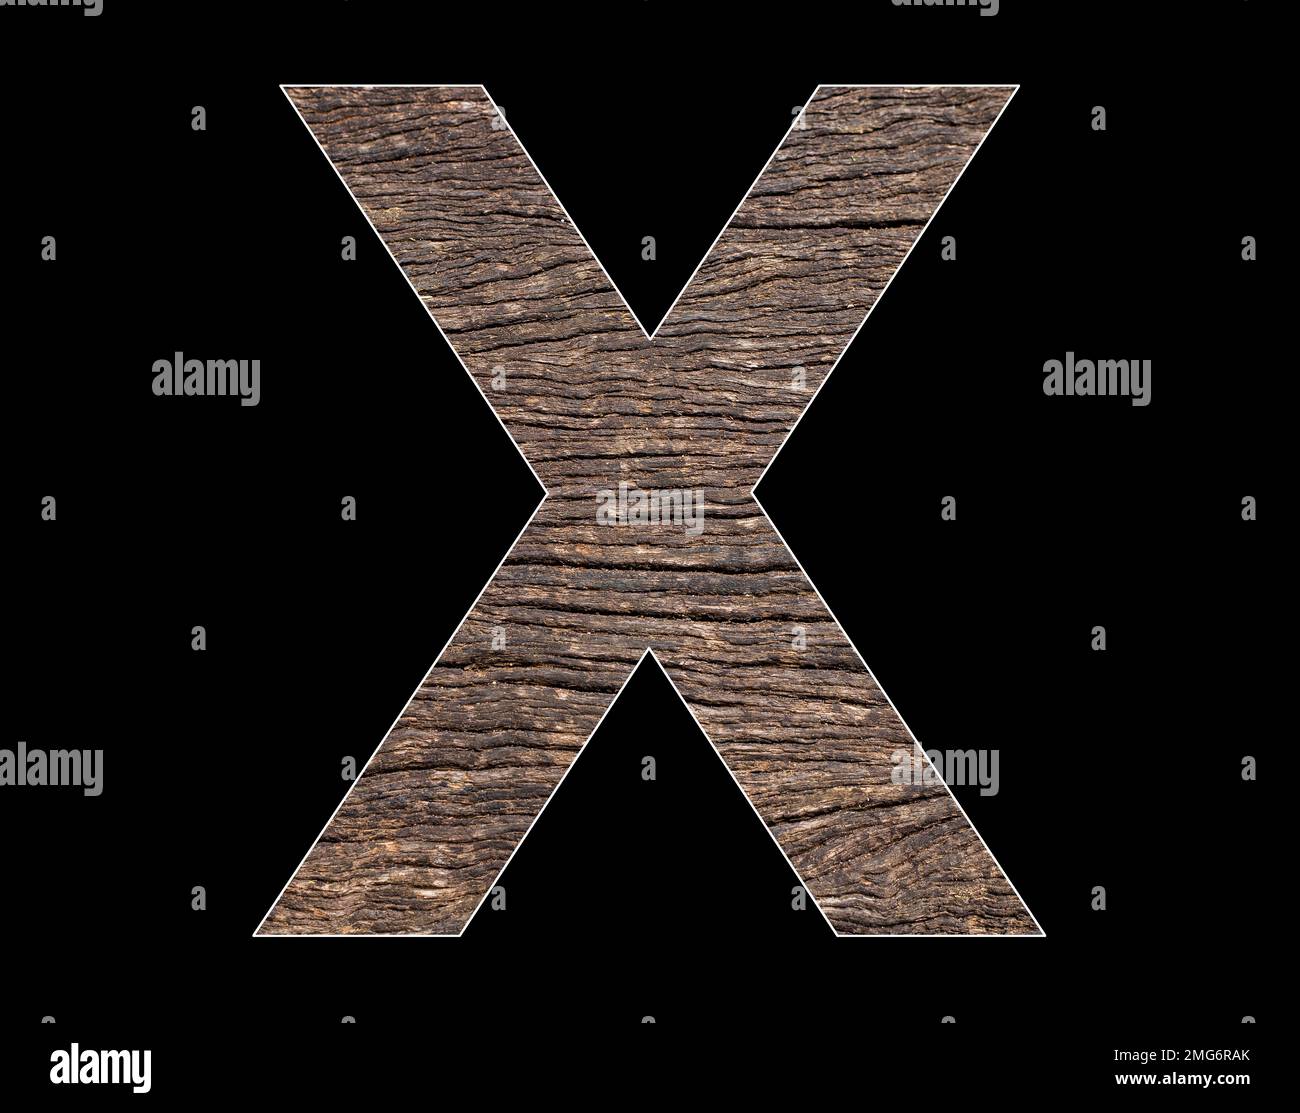 Uppercase letter X of the alphabet - Rustic tree cortex texture Stock Photo